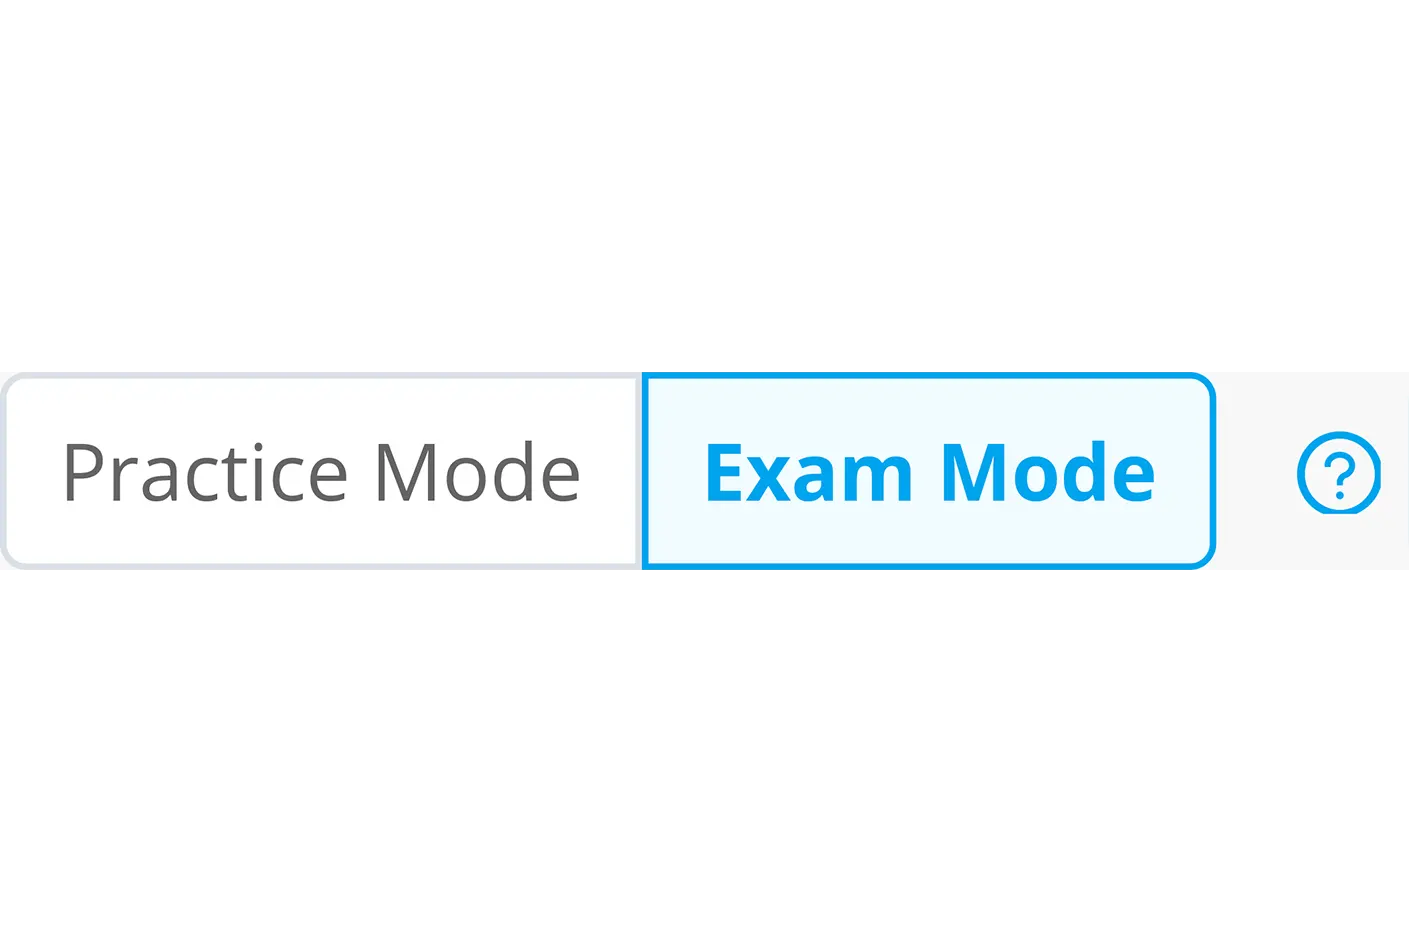 There is a screenshot of exam mode select for Legal Practice Course practice test